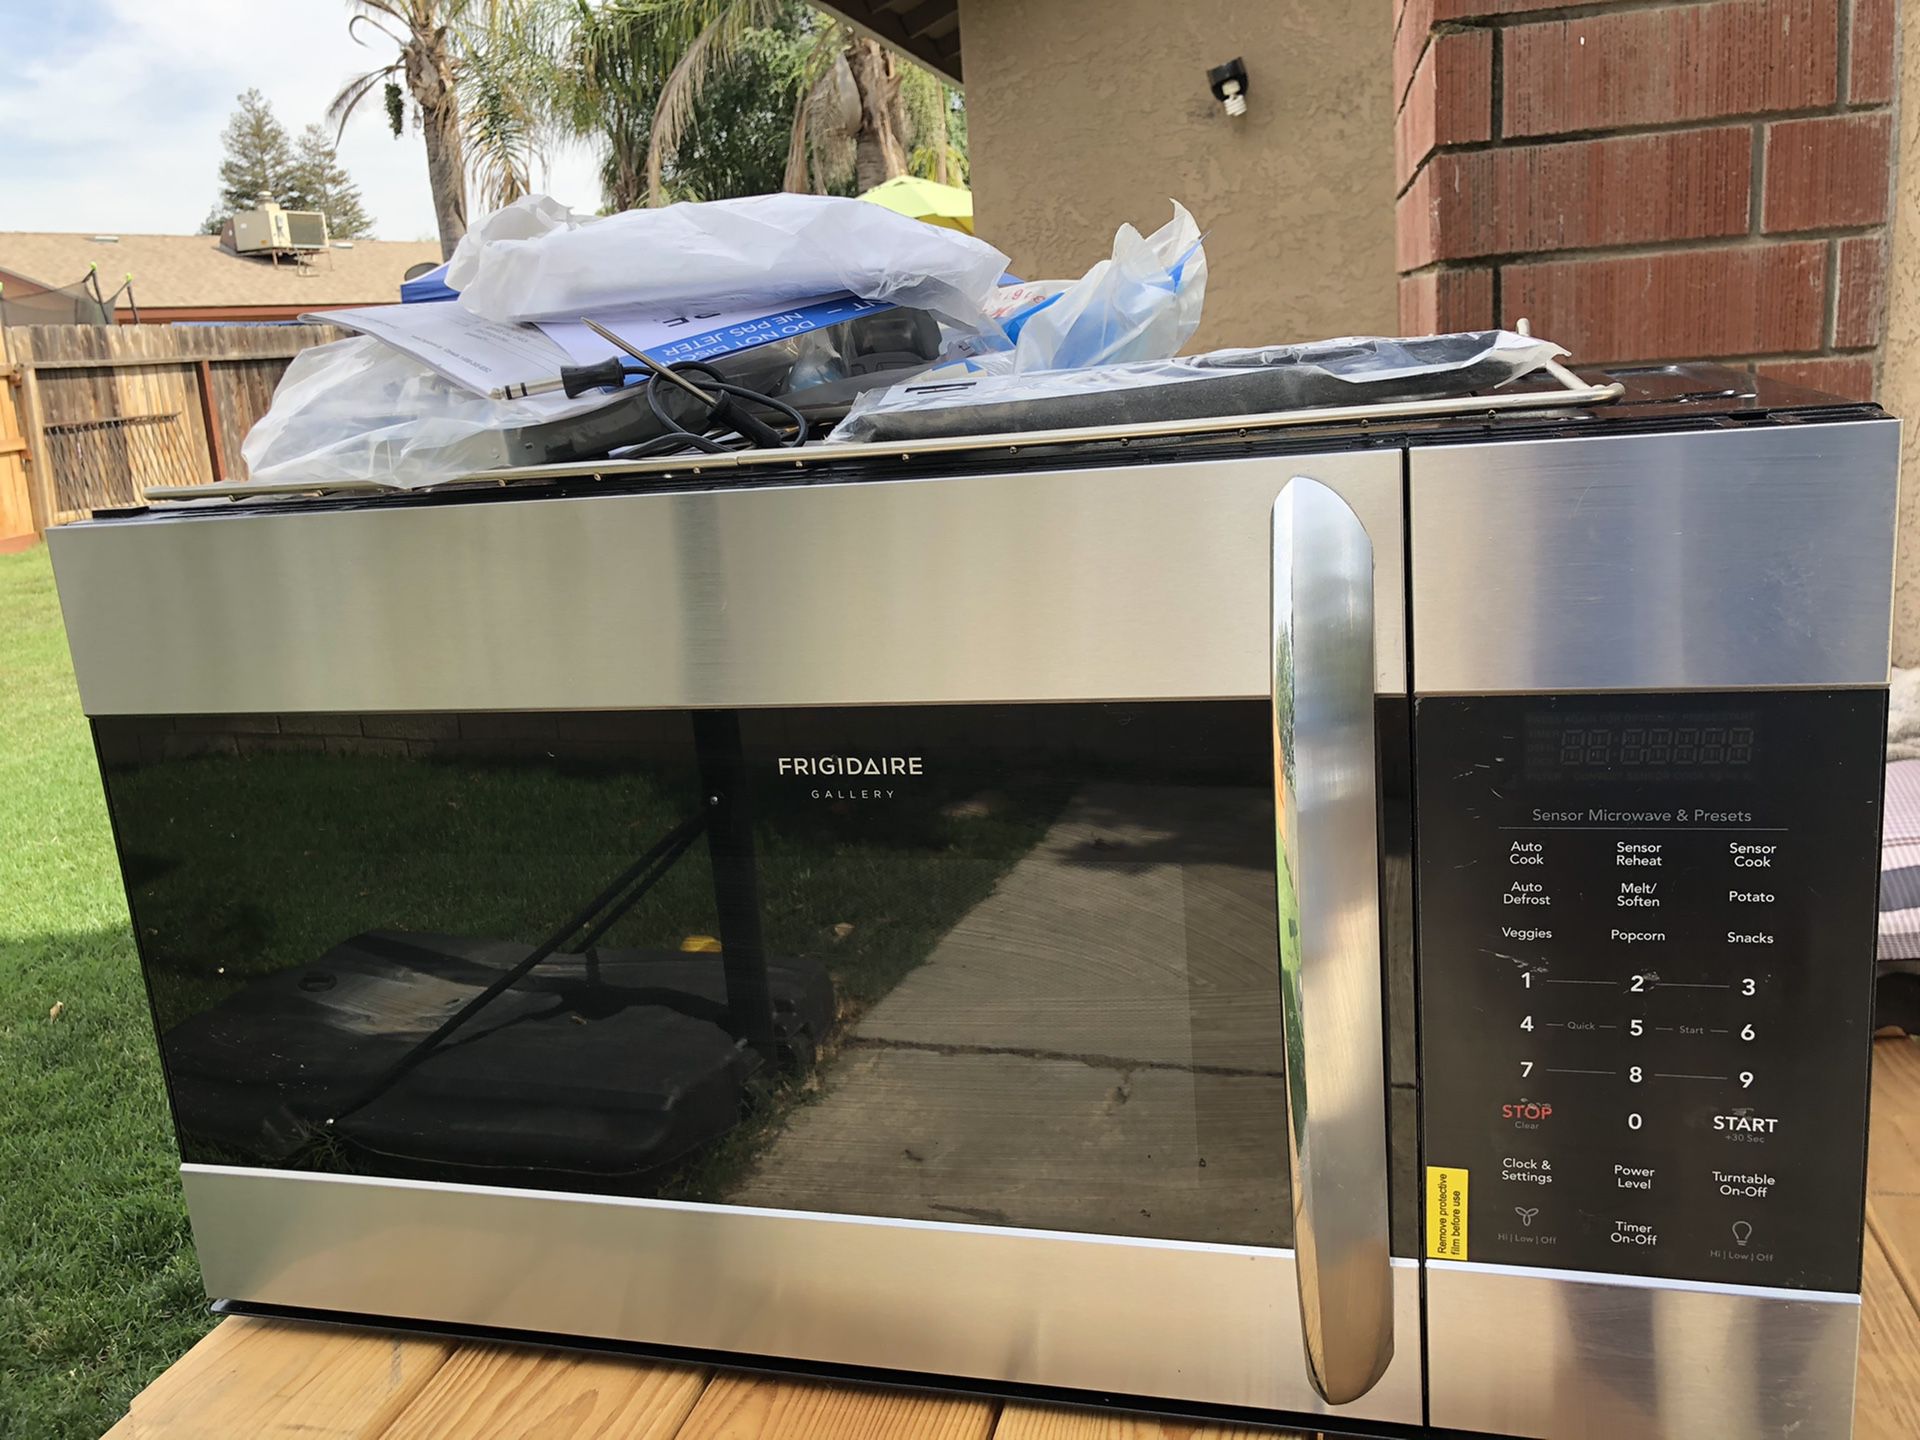 Frigidaire microwave oven